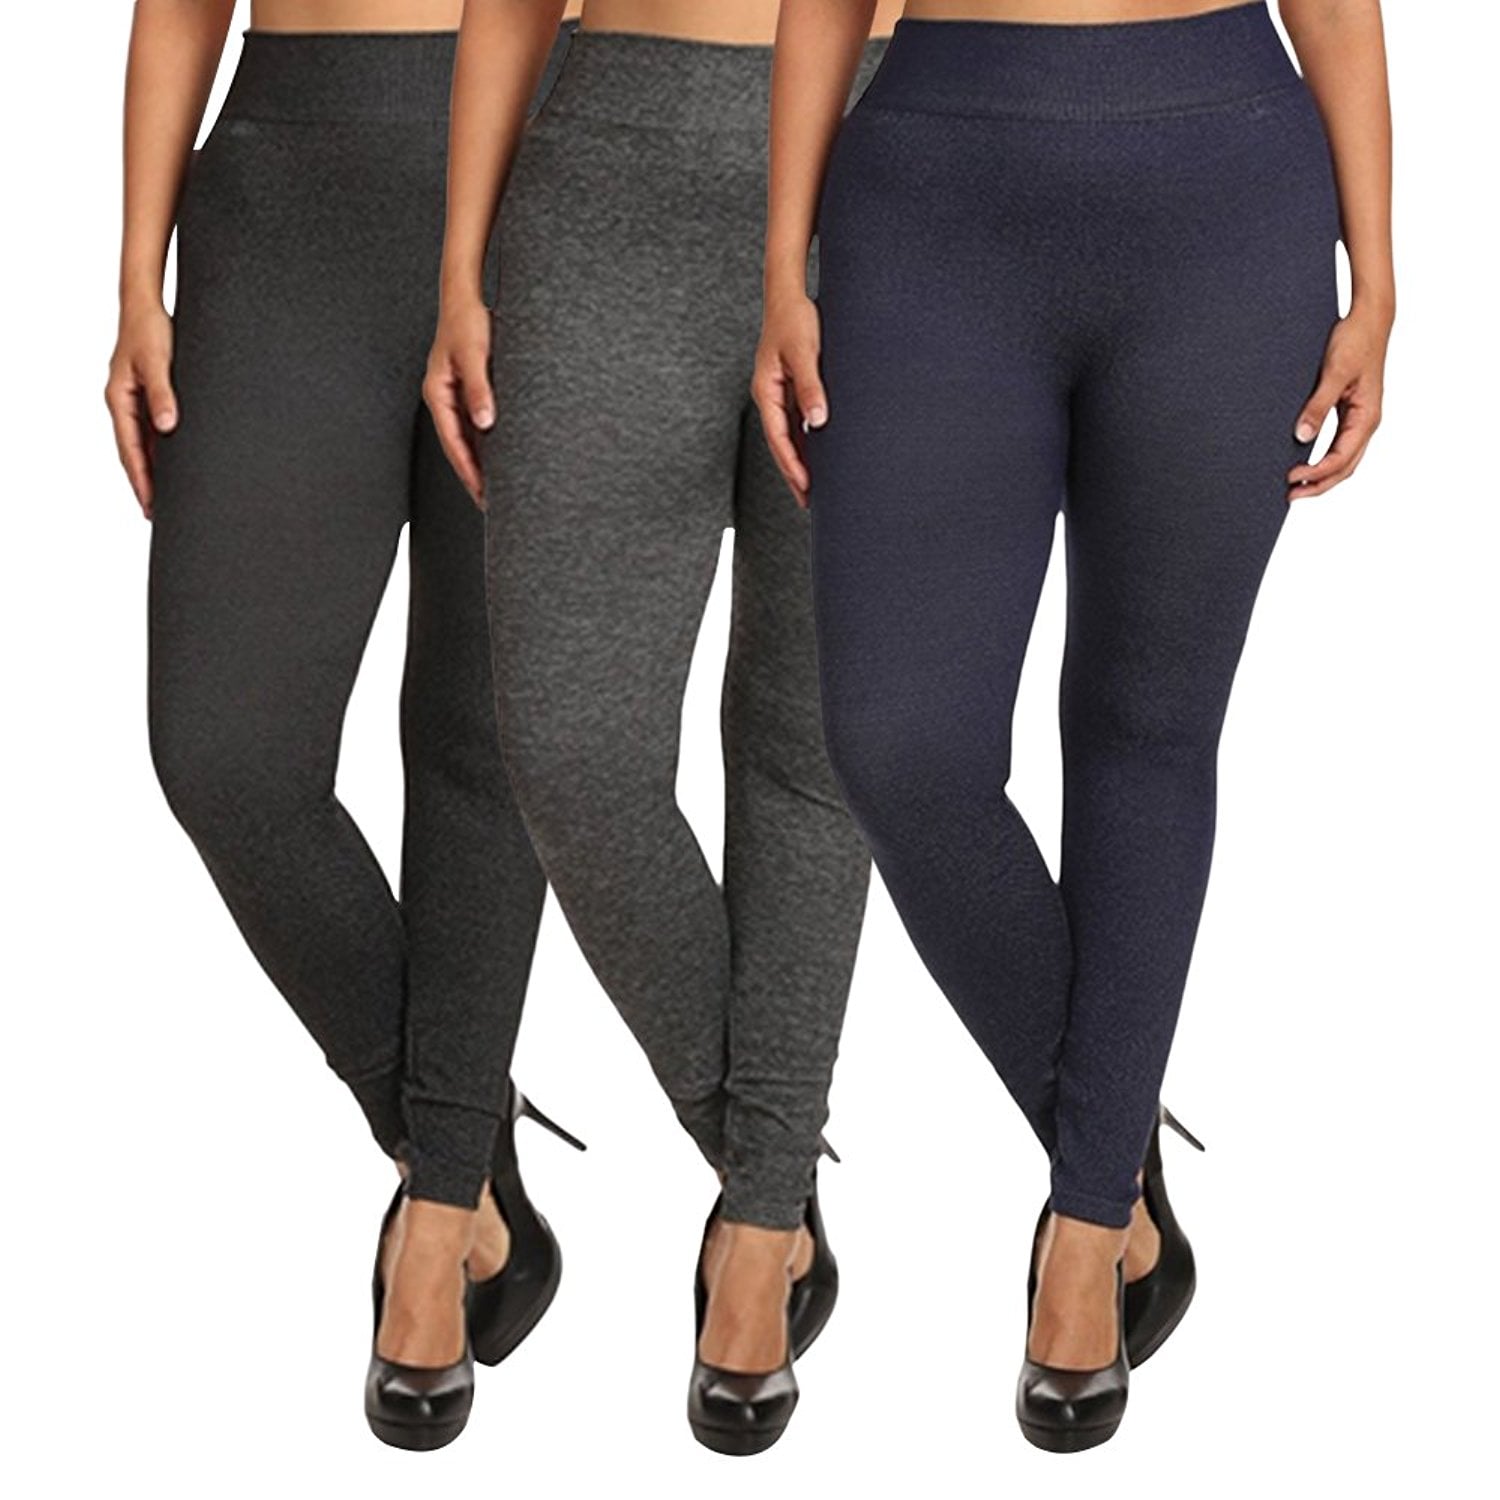 shosho leggings, shosho leggings Suppliers and Manufacturers at